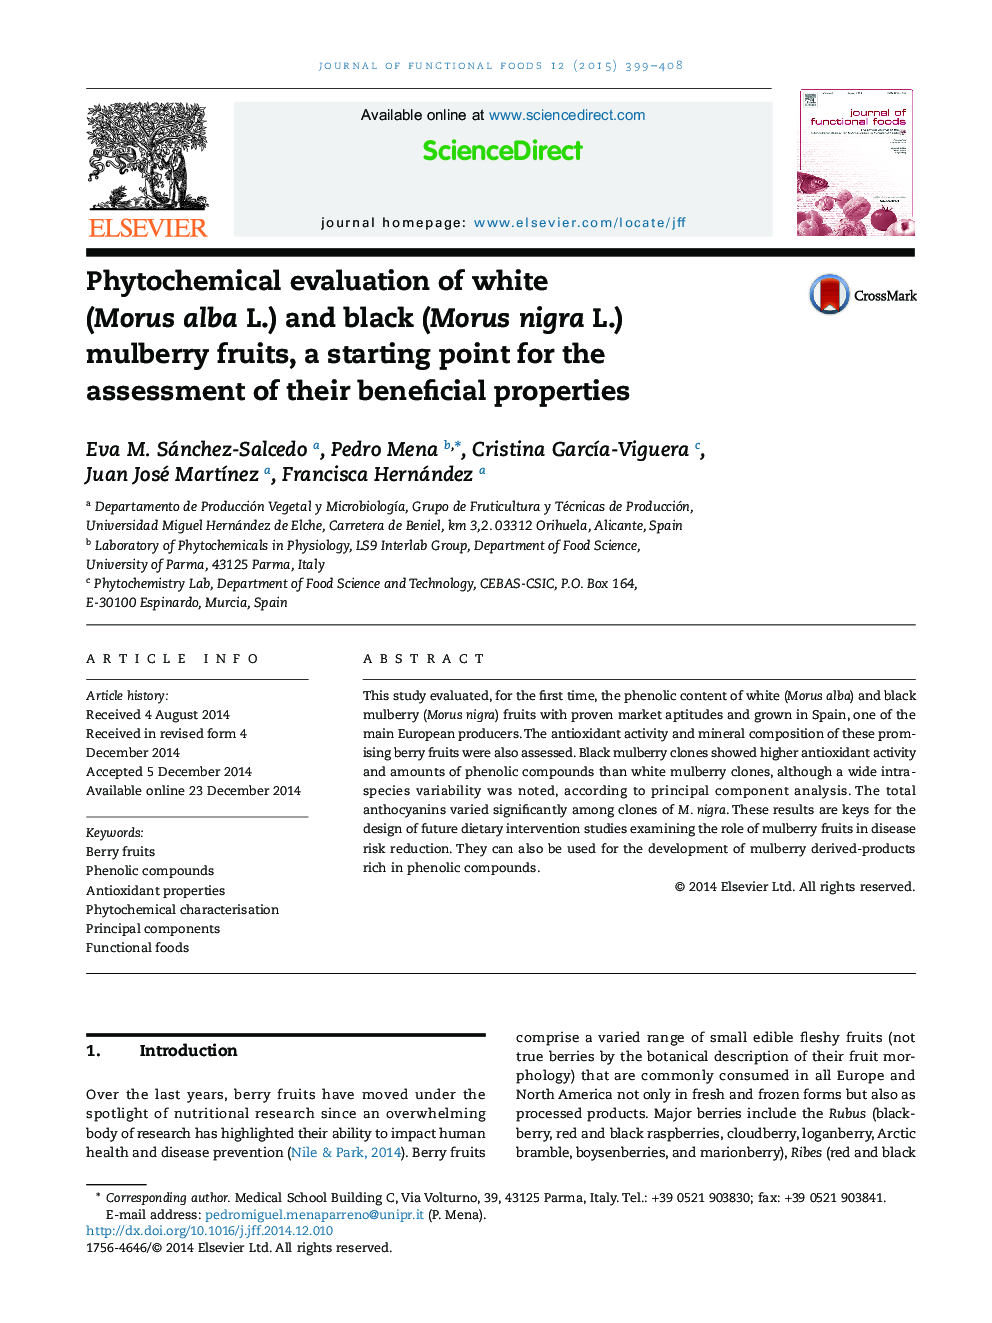 Phytochemical evaluation of white (Morus alba L.) and black (Morus nigra L.) mulberry fruits, a starting point for the assessment of their beneficial properties